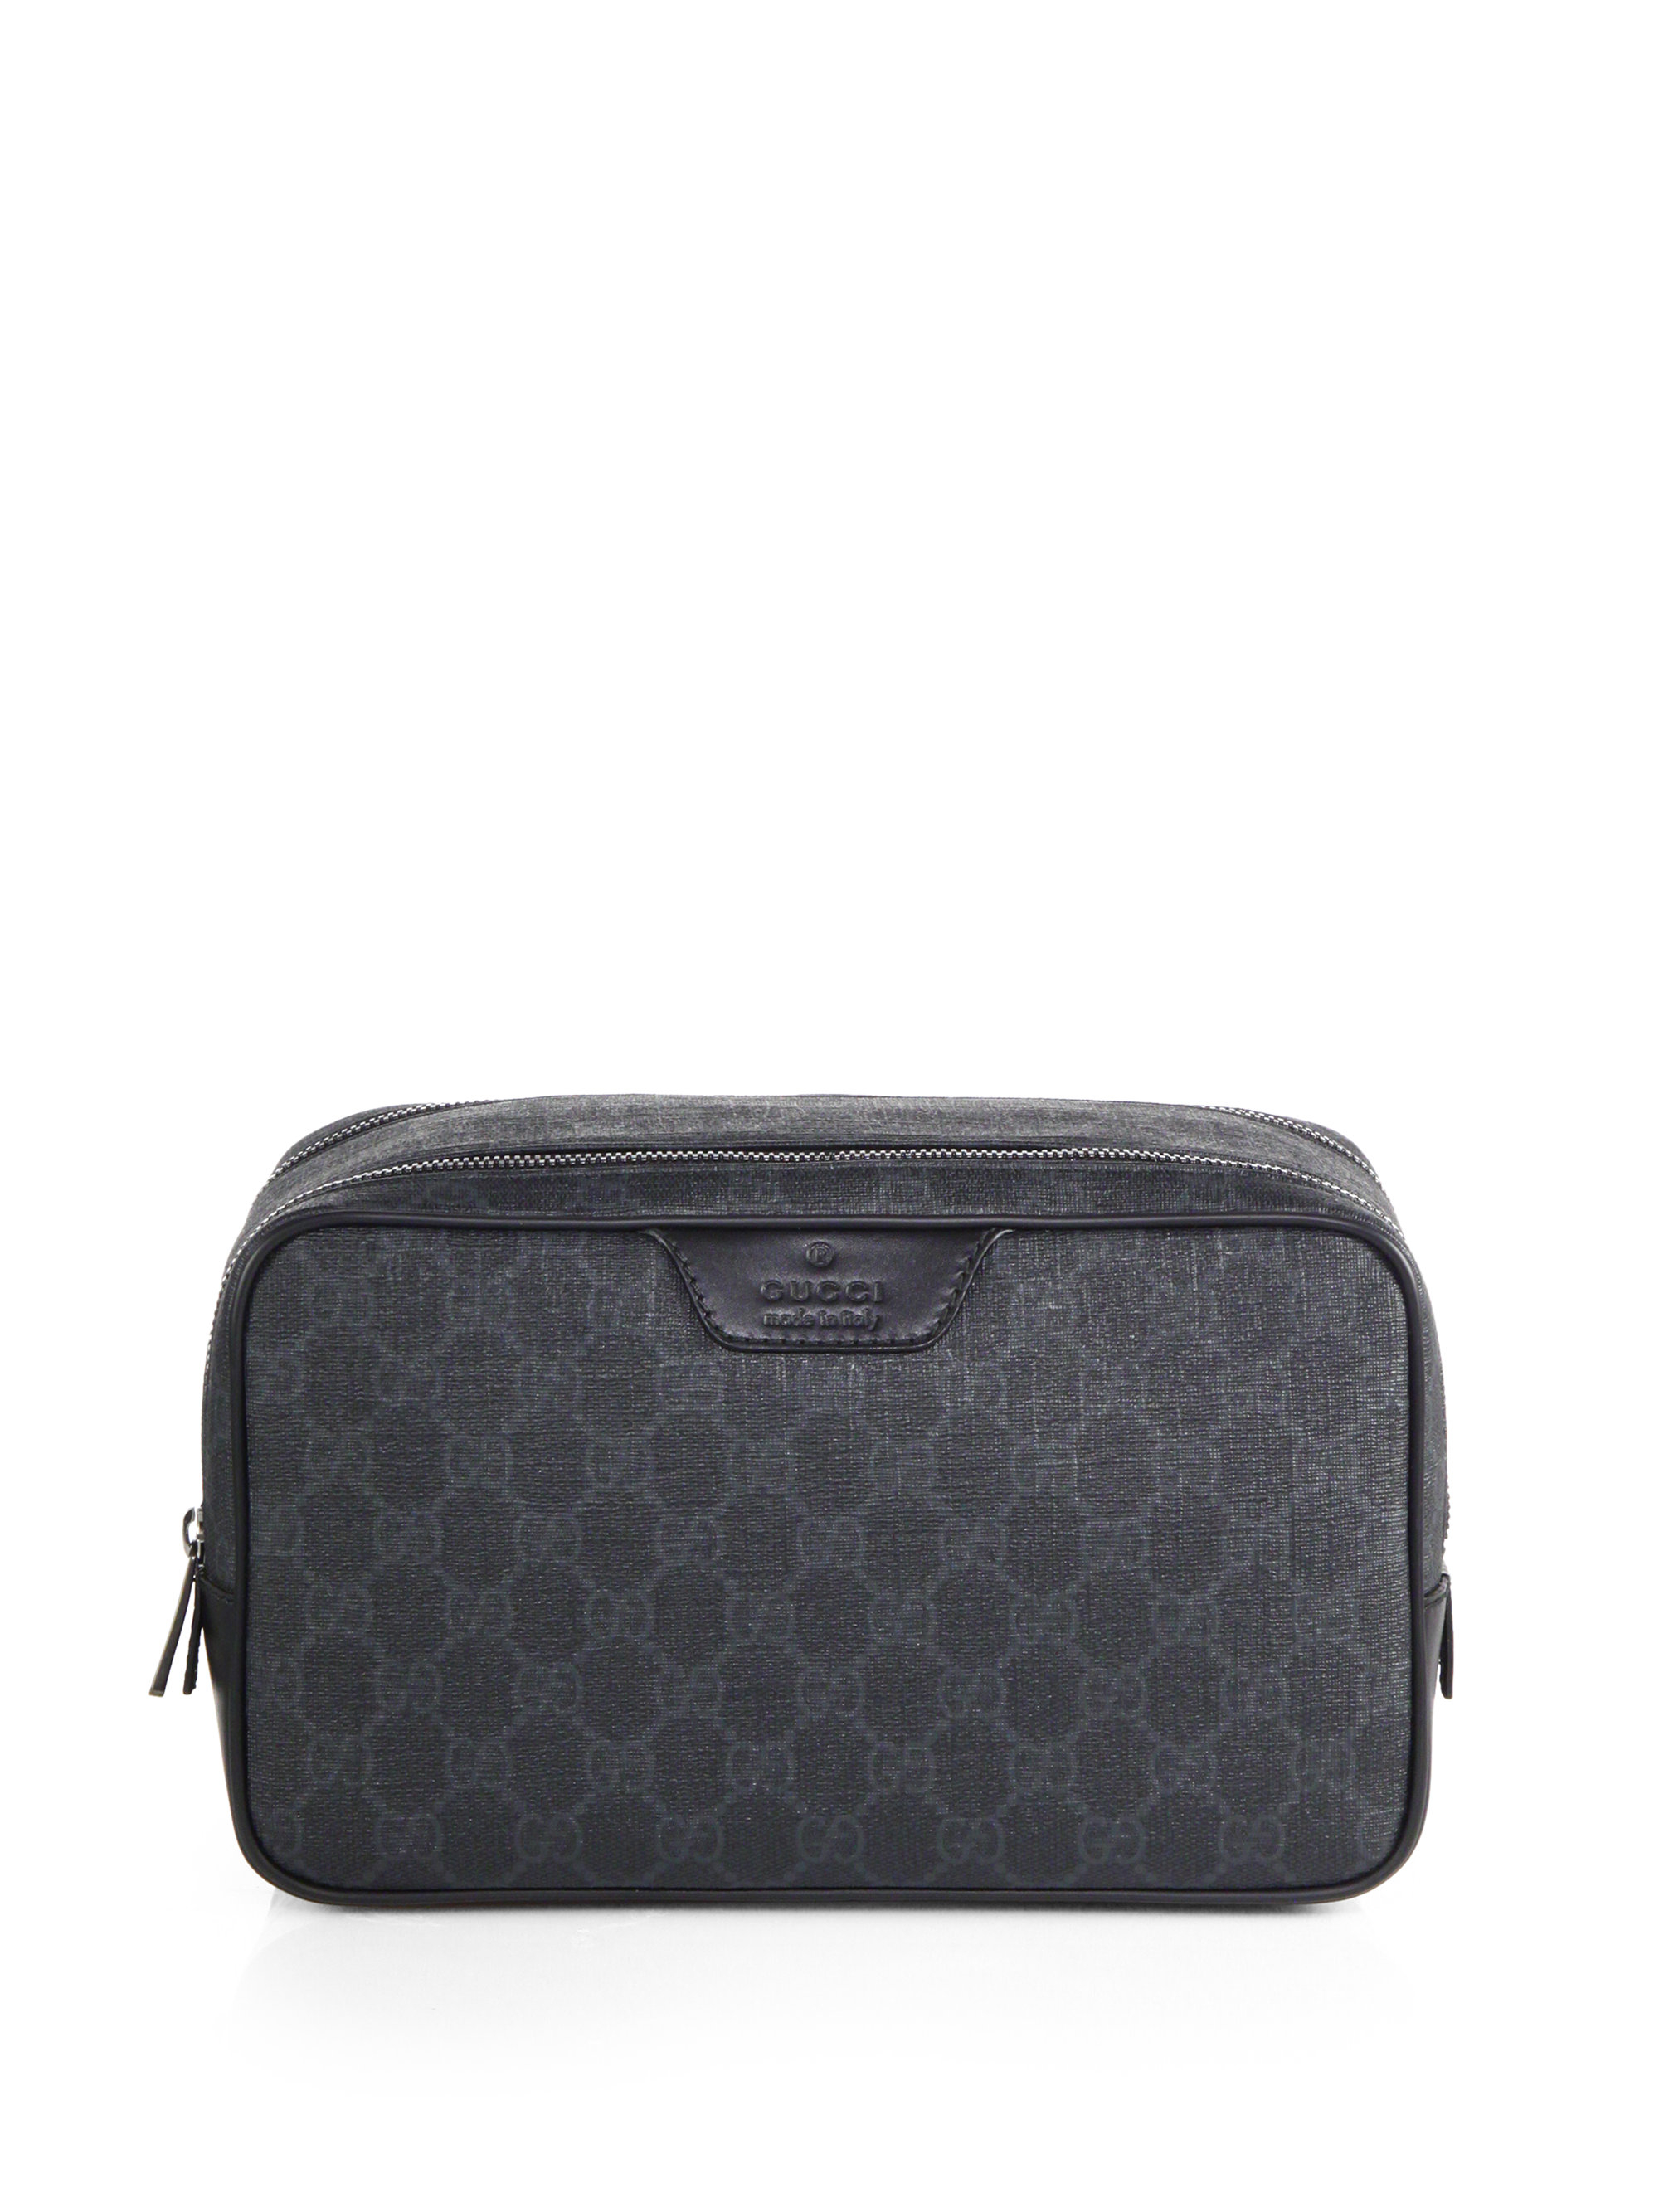 gucci toiletry bag for men